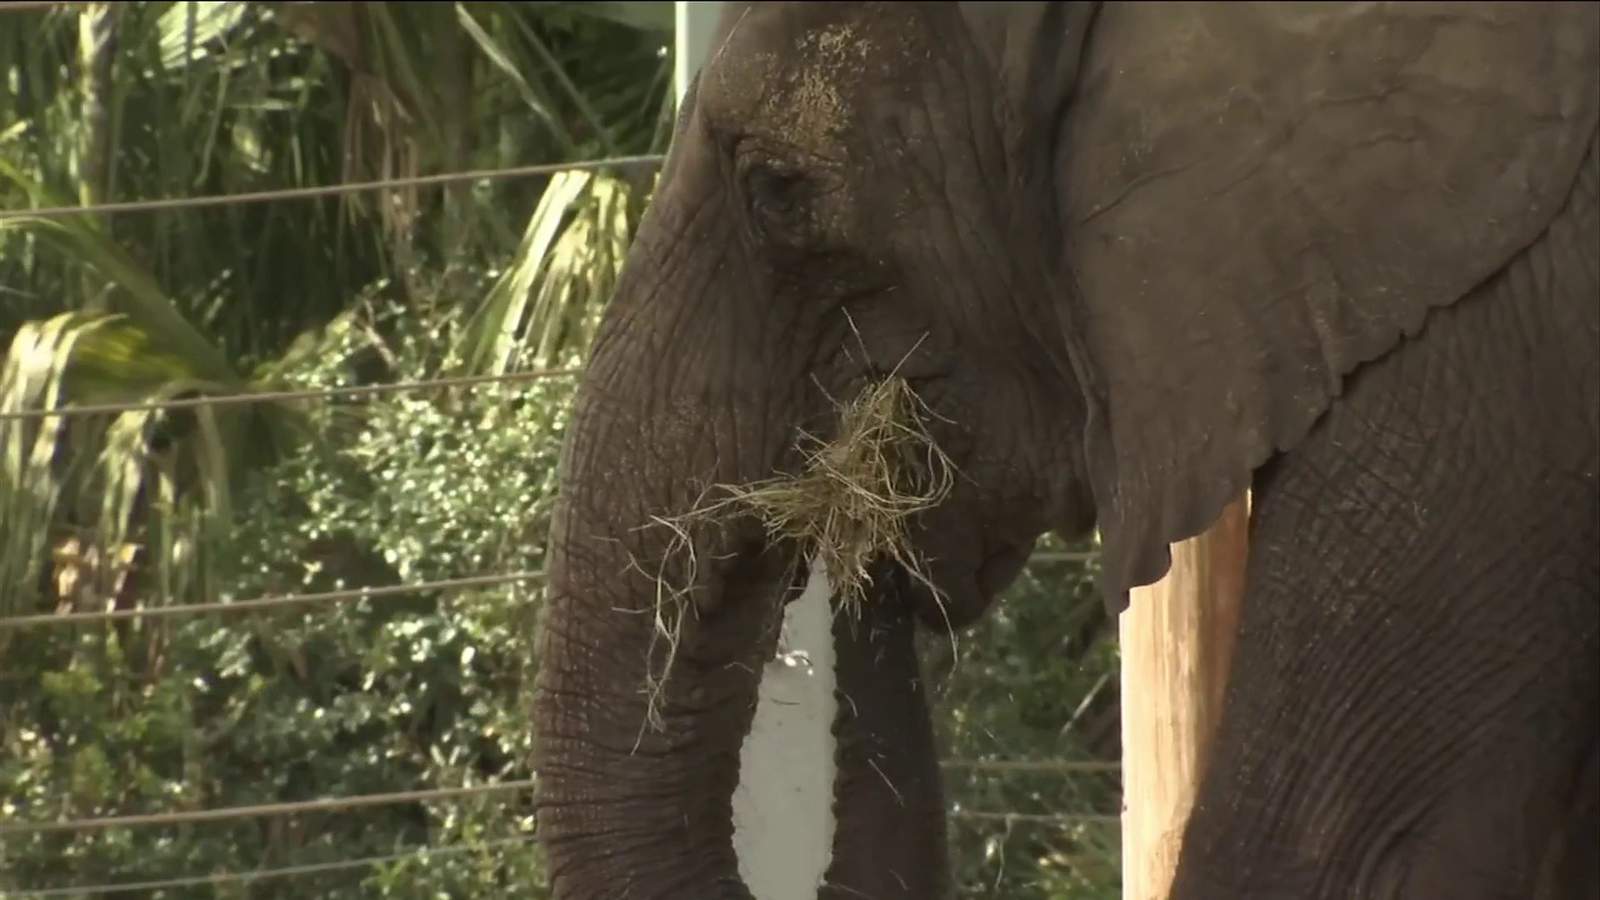 Jacksonville Zoo and Gardens tries to recover from $6M in losses due to pandemic